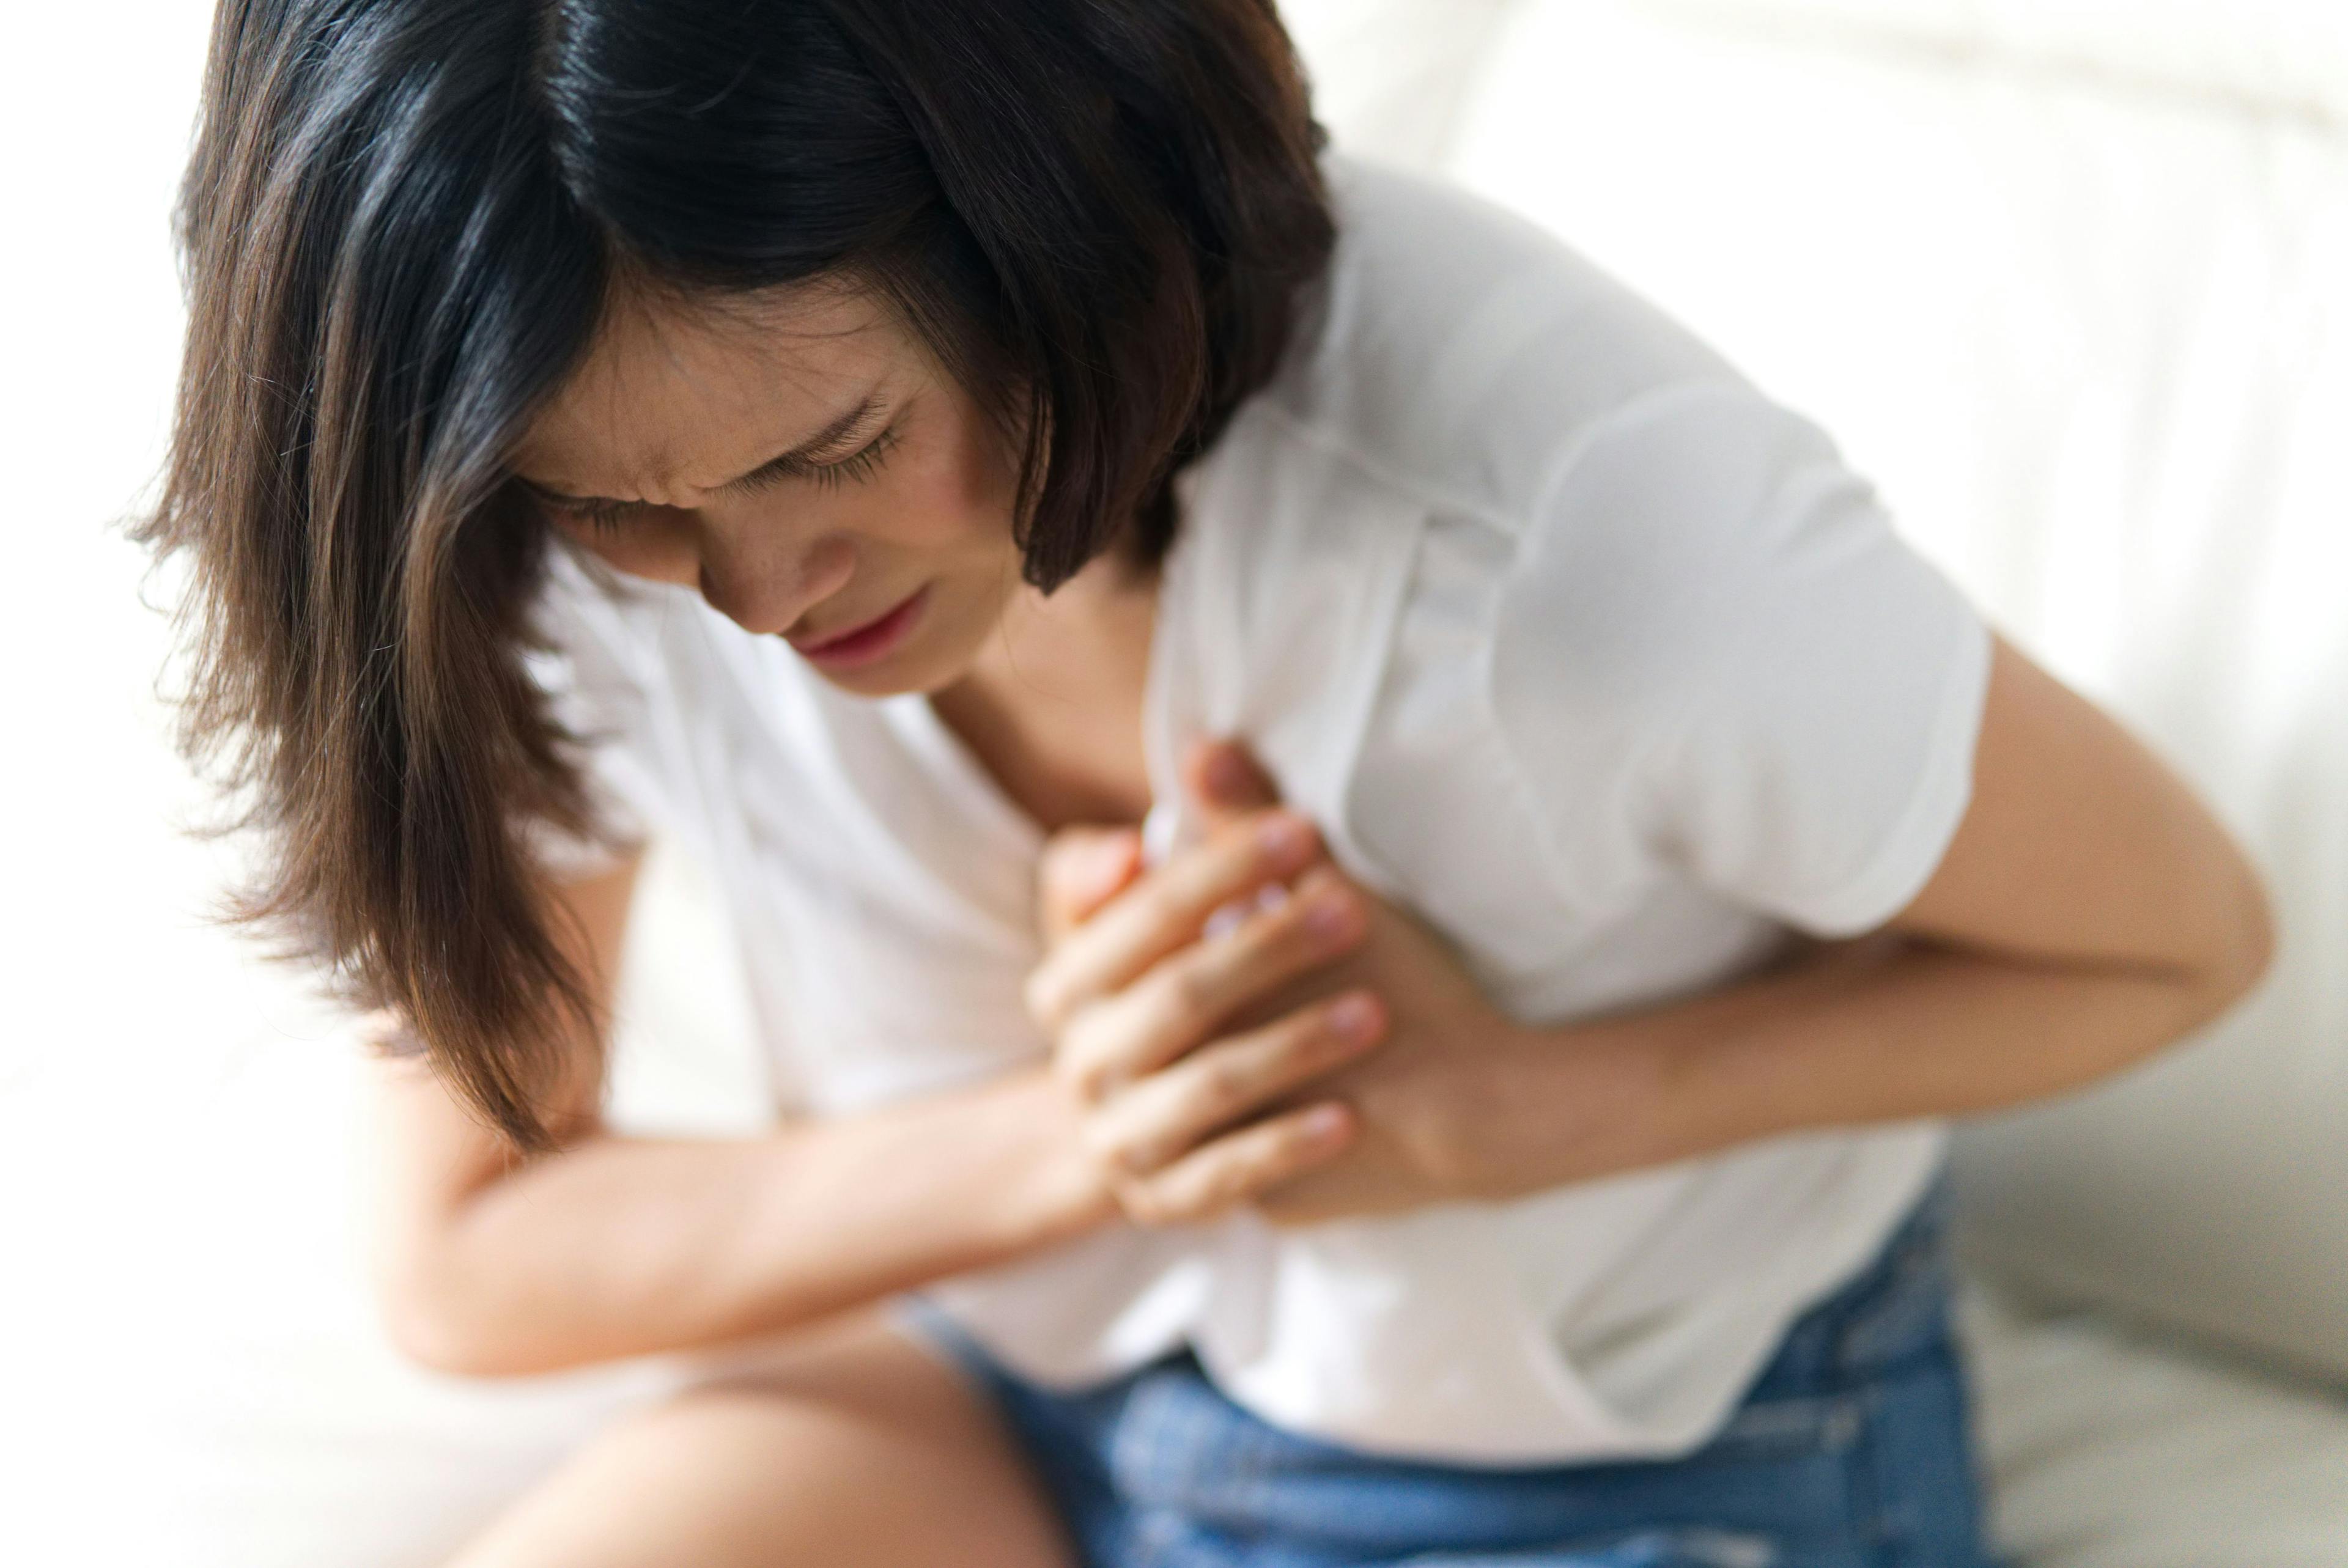 Unwell condition and sickness concept; Asian woman having heart attack sitting on sofa. She puts both hand on her left chest feeling painful and need emergency medical assistance | Image credit: Kawee - stock.adobe.com